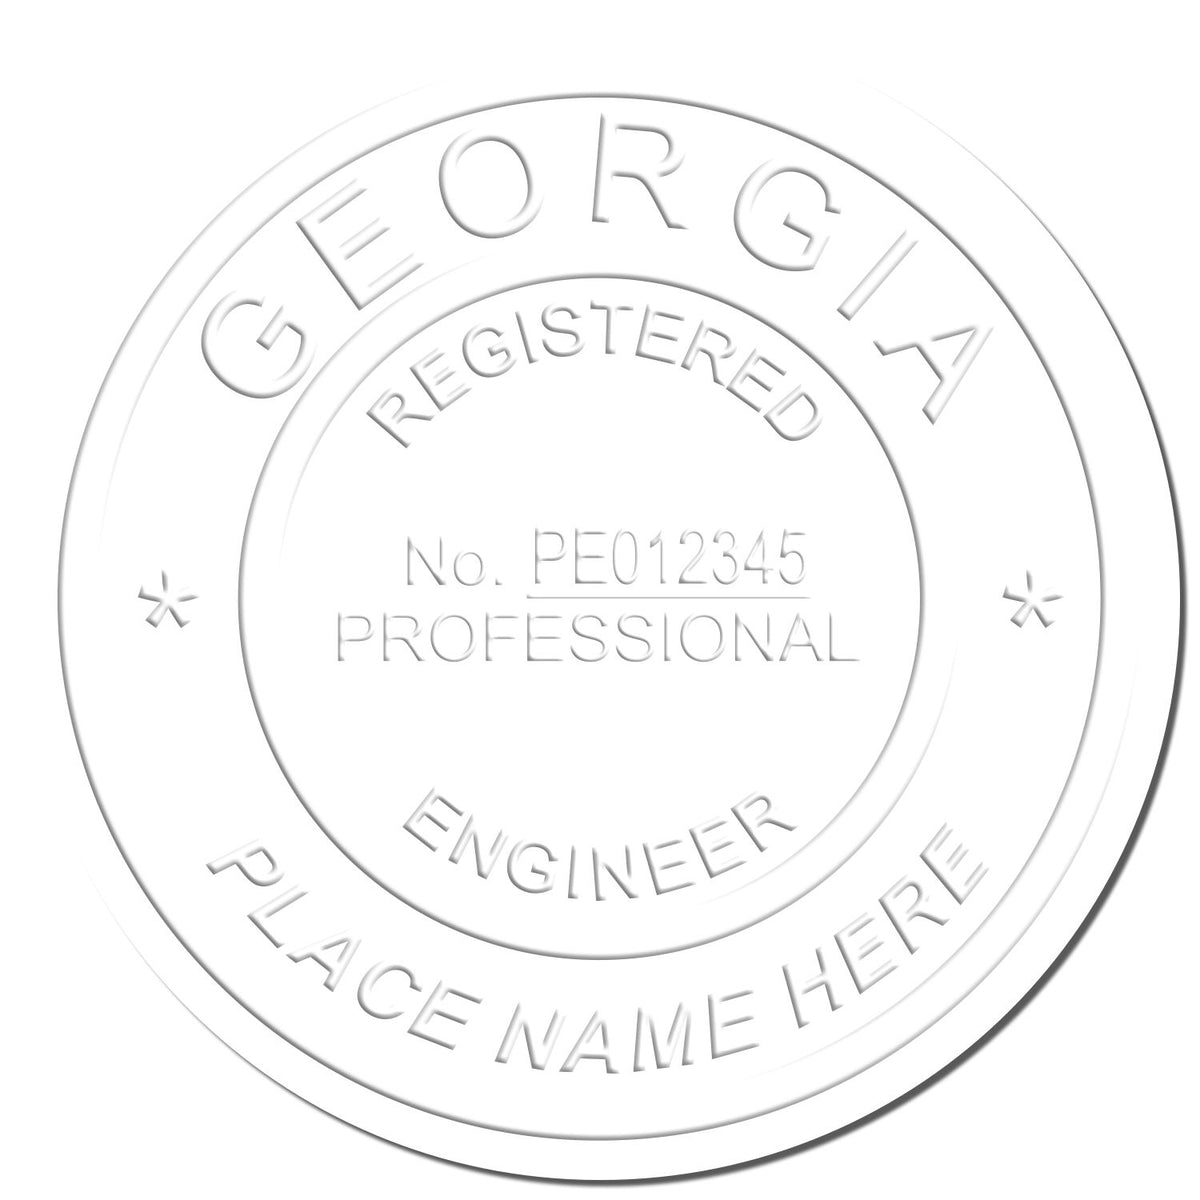 Another Example of a stamped impression of the Georgia Engineer Desk Seal on a piece of office paper.